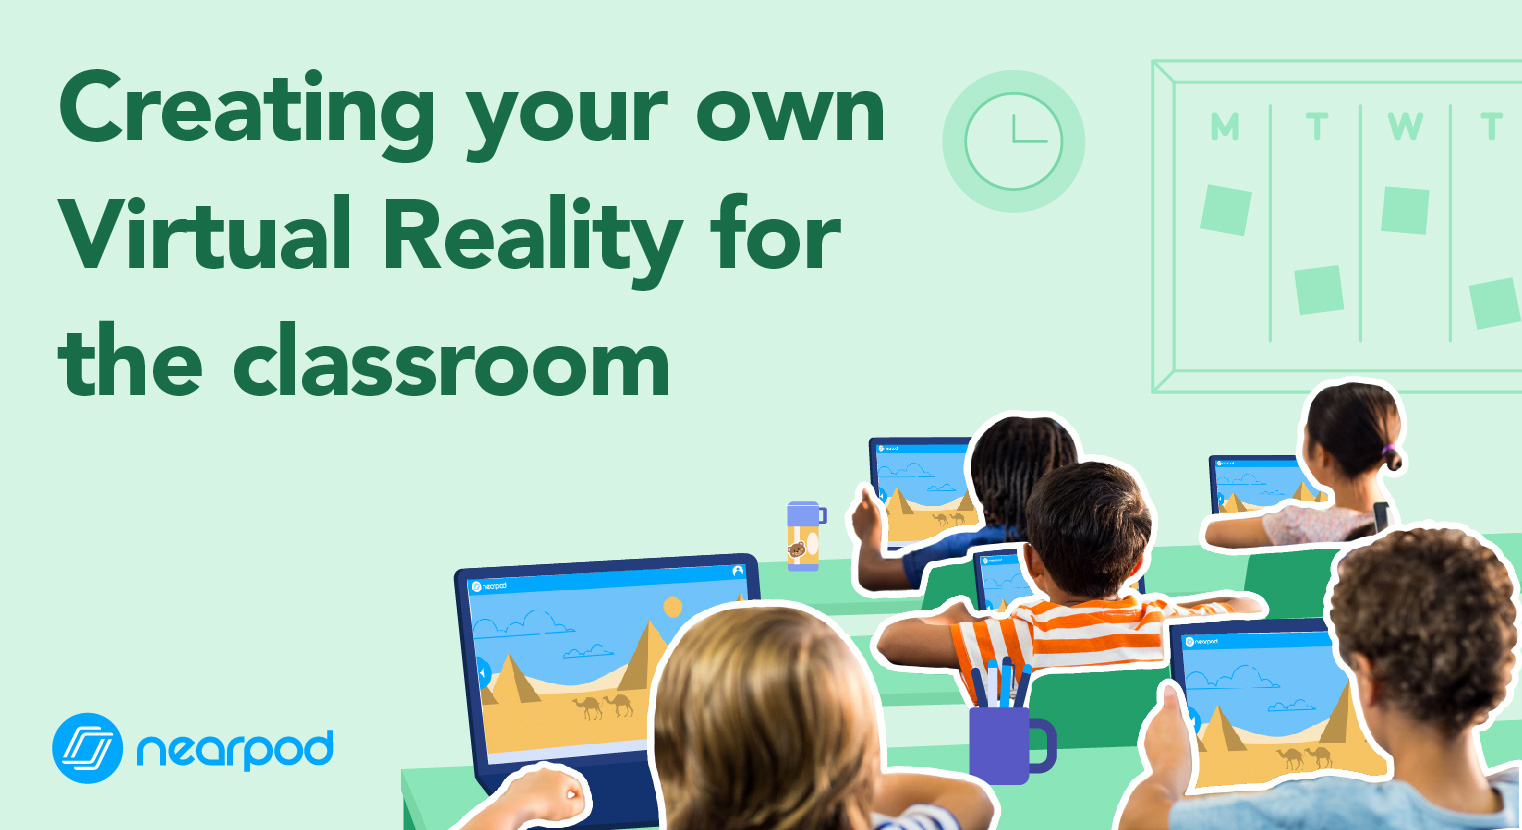 Creating your own Virtual Reality for the classroom